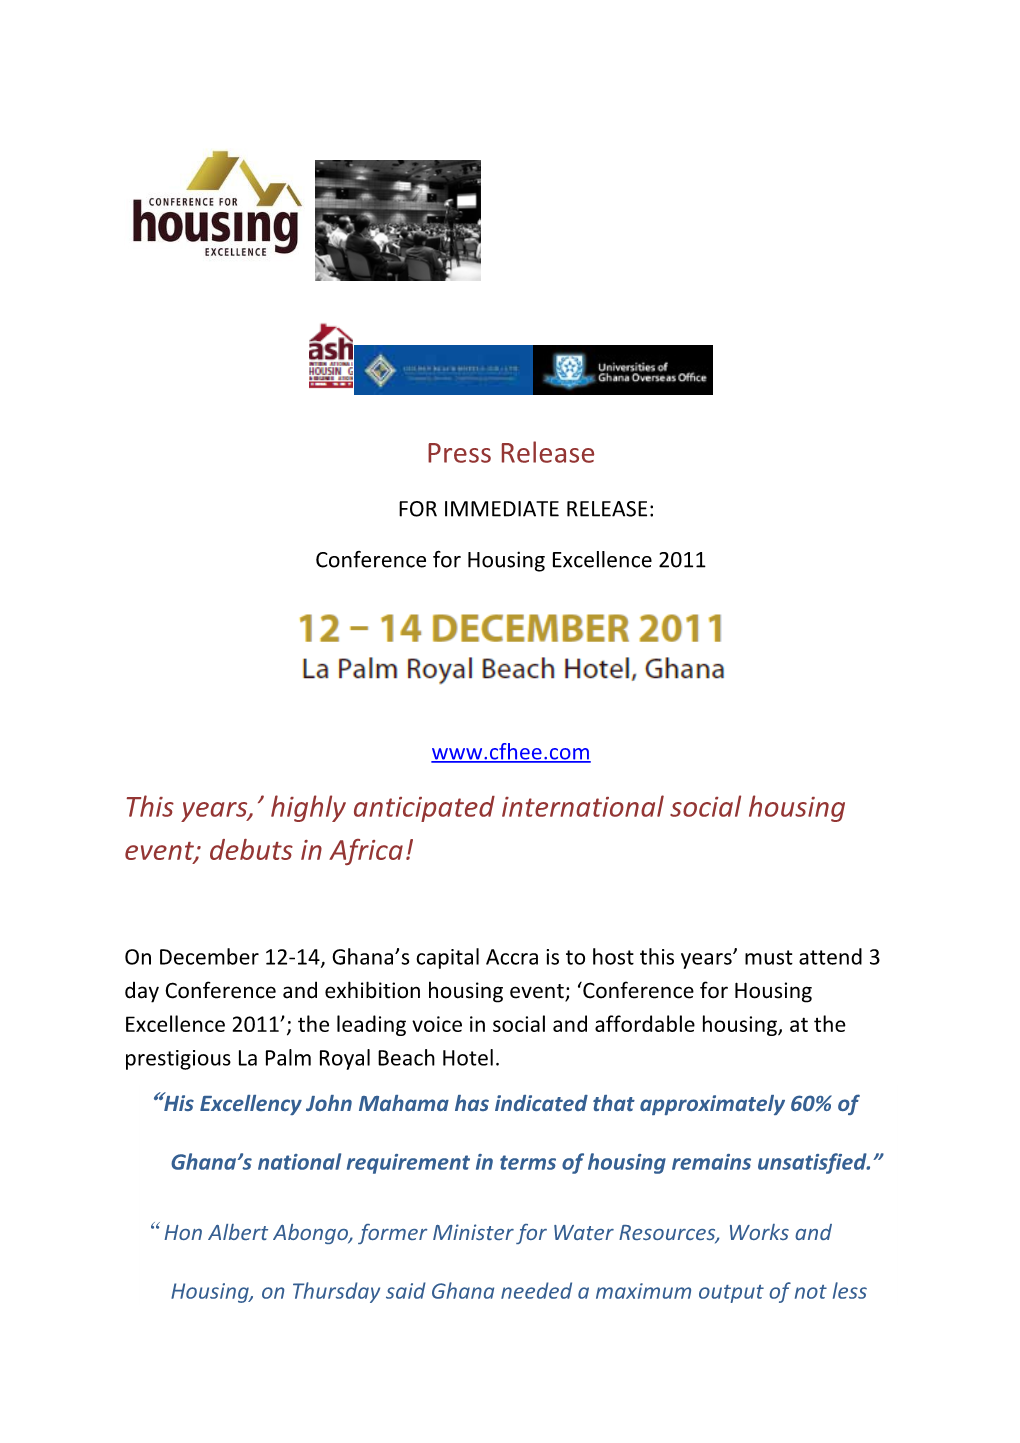 This Years, Highly Anticipated International Social Housing Event; Debuts in Africa!